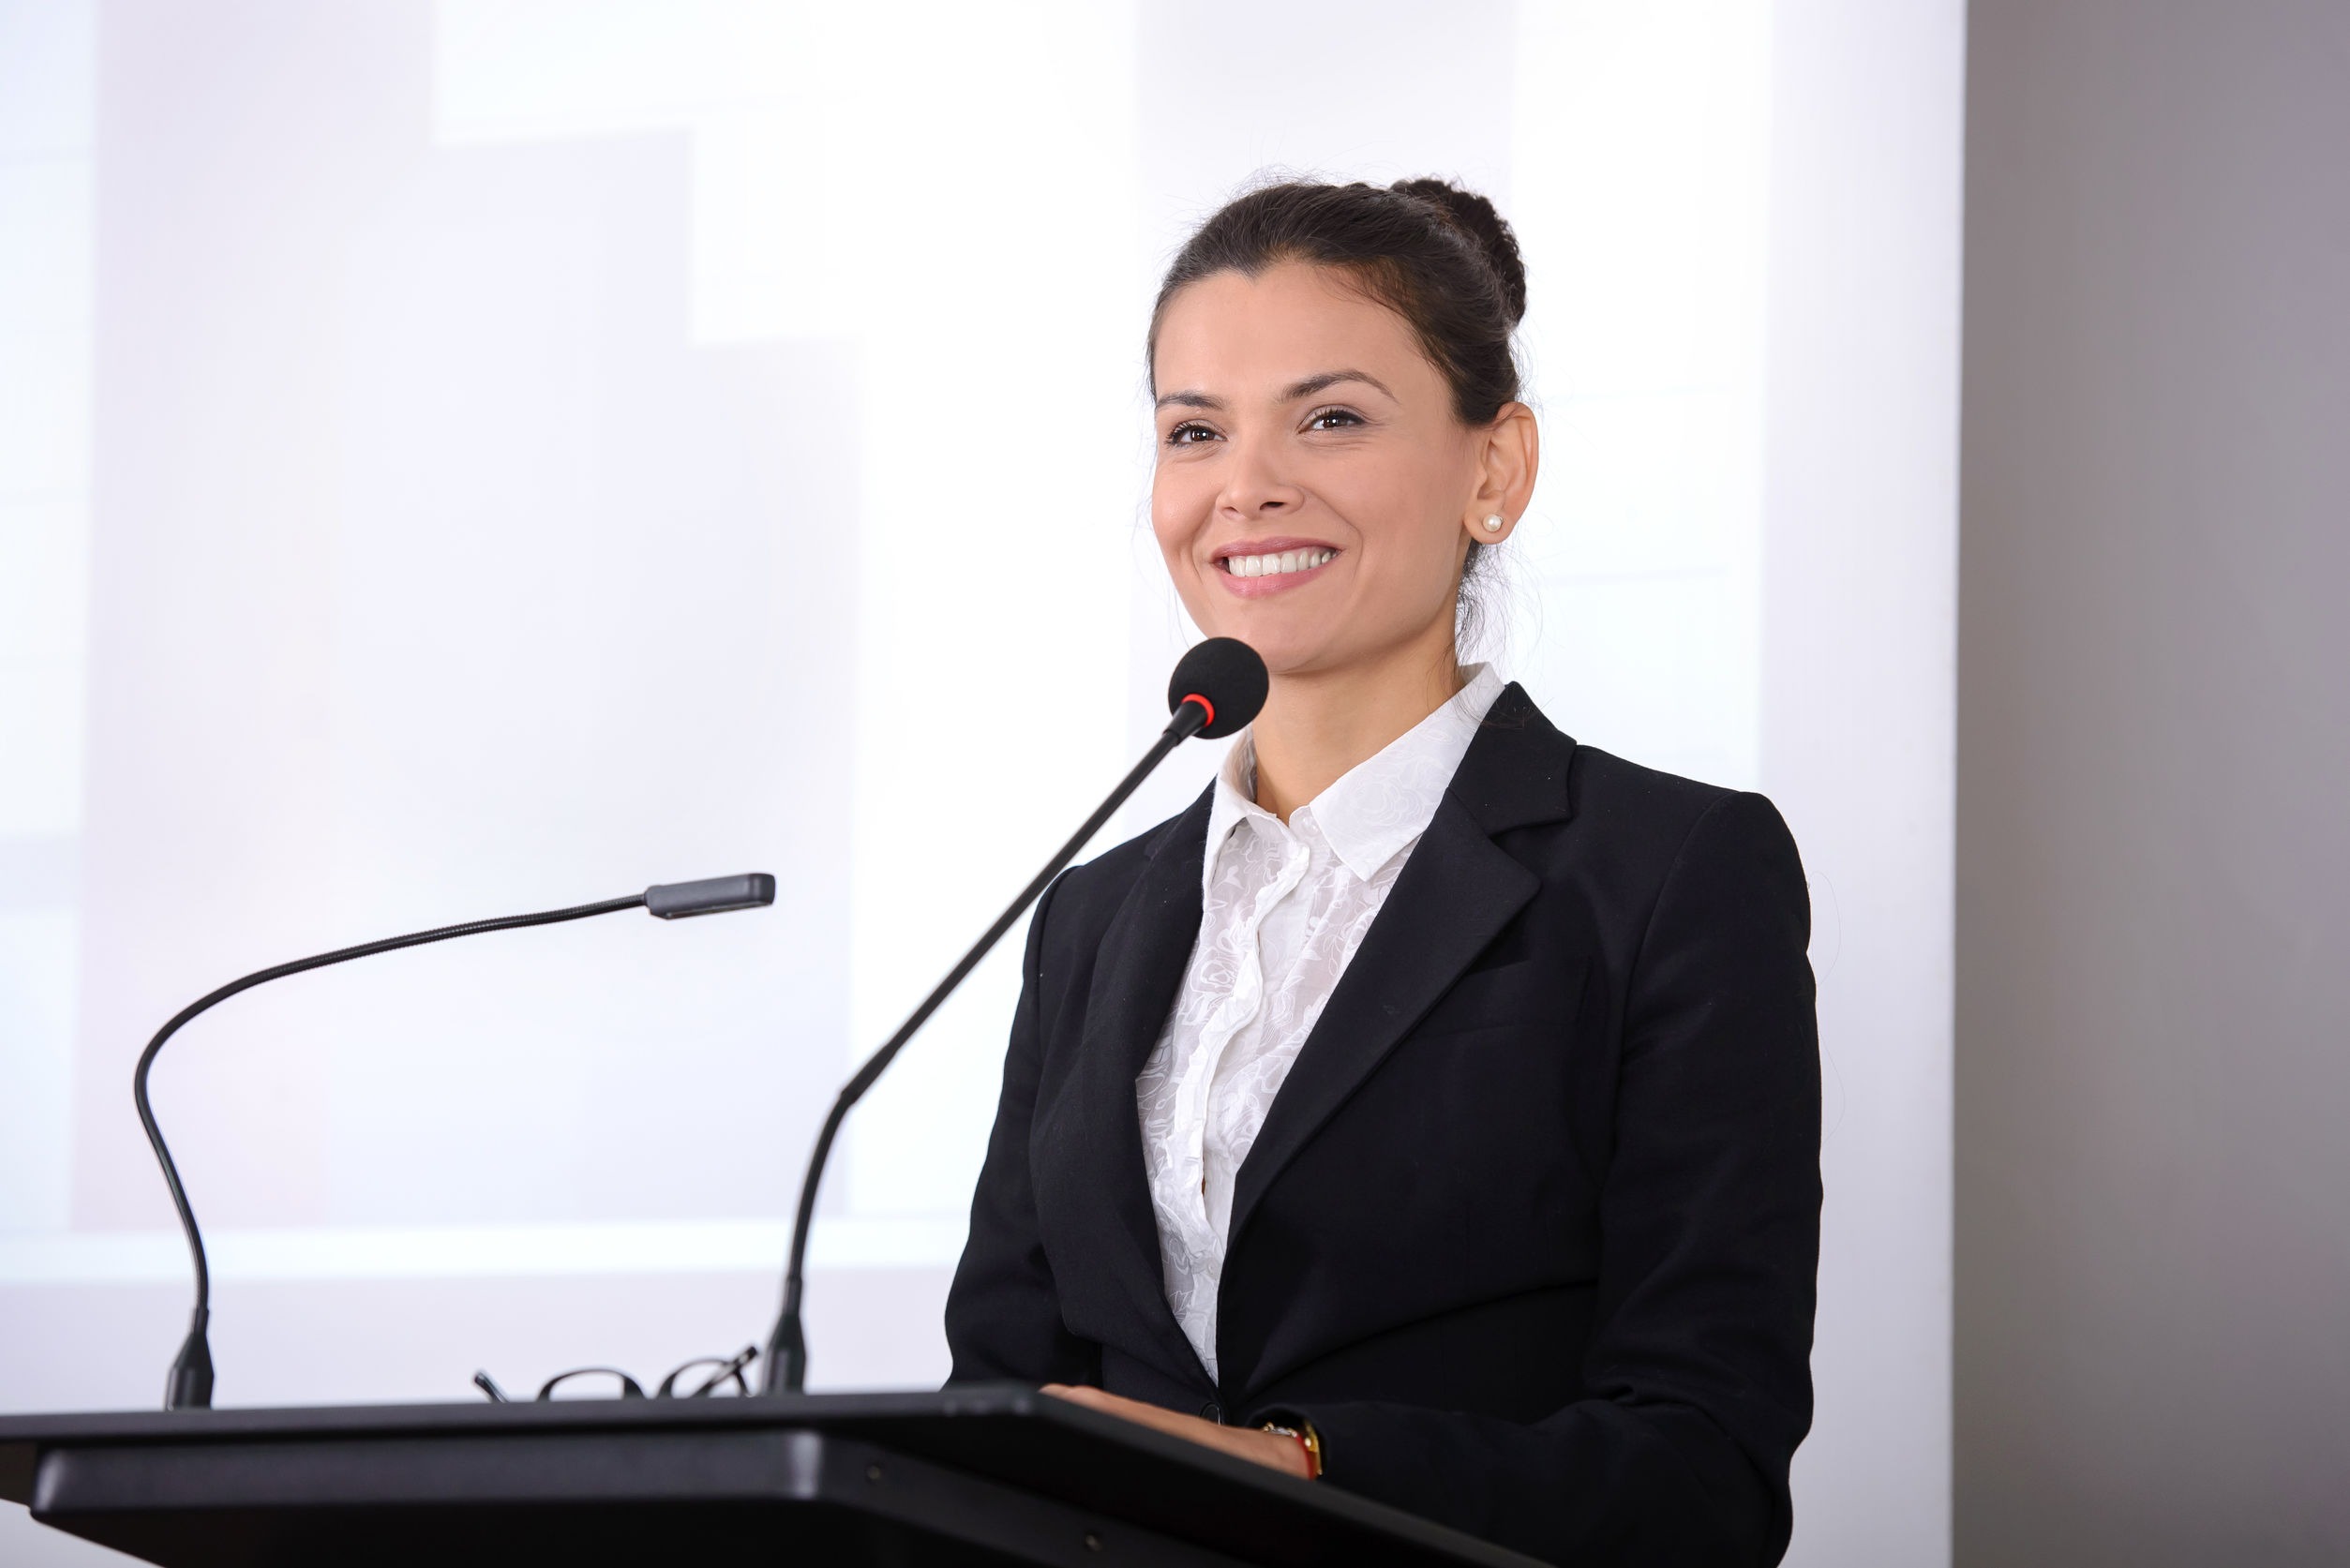 speechwriting-tips-Conference